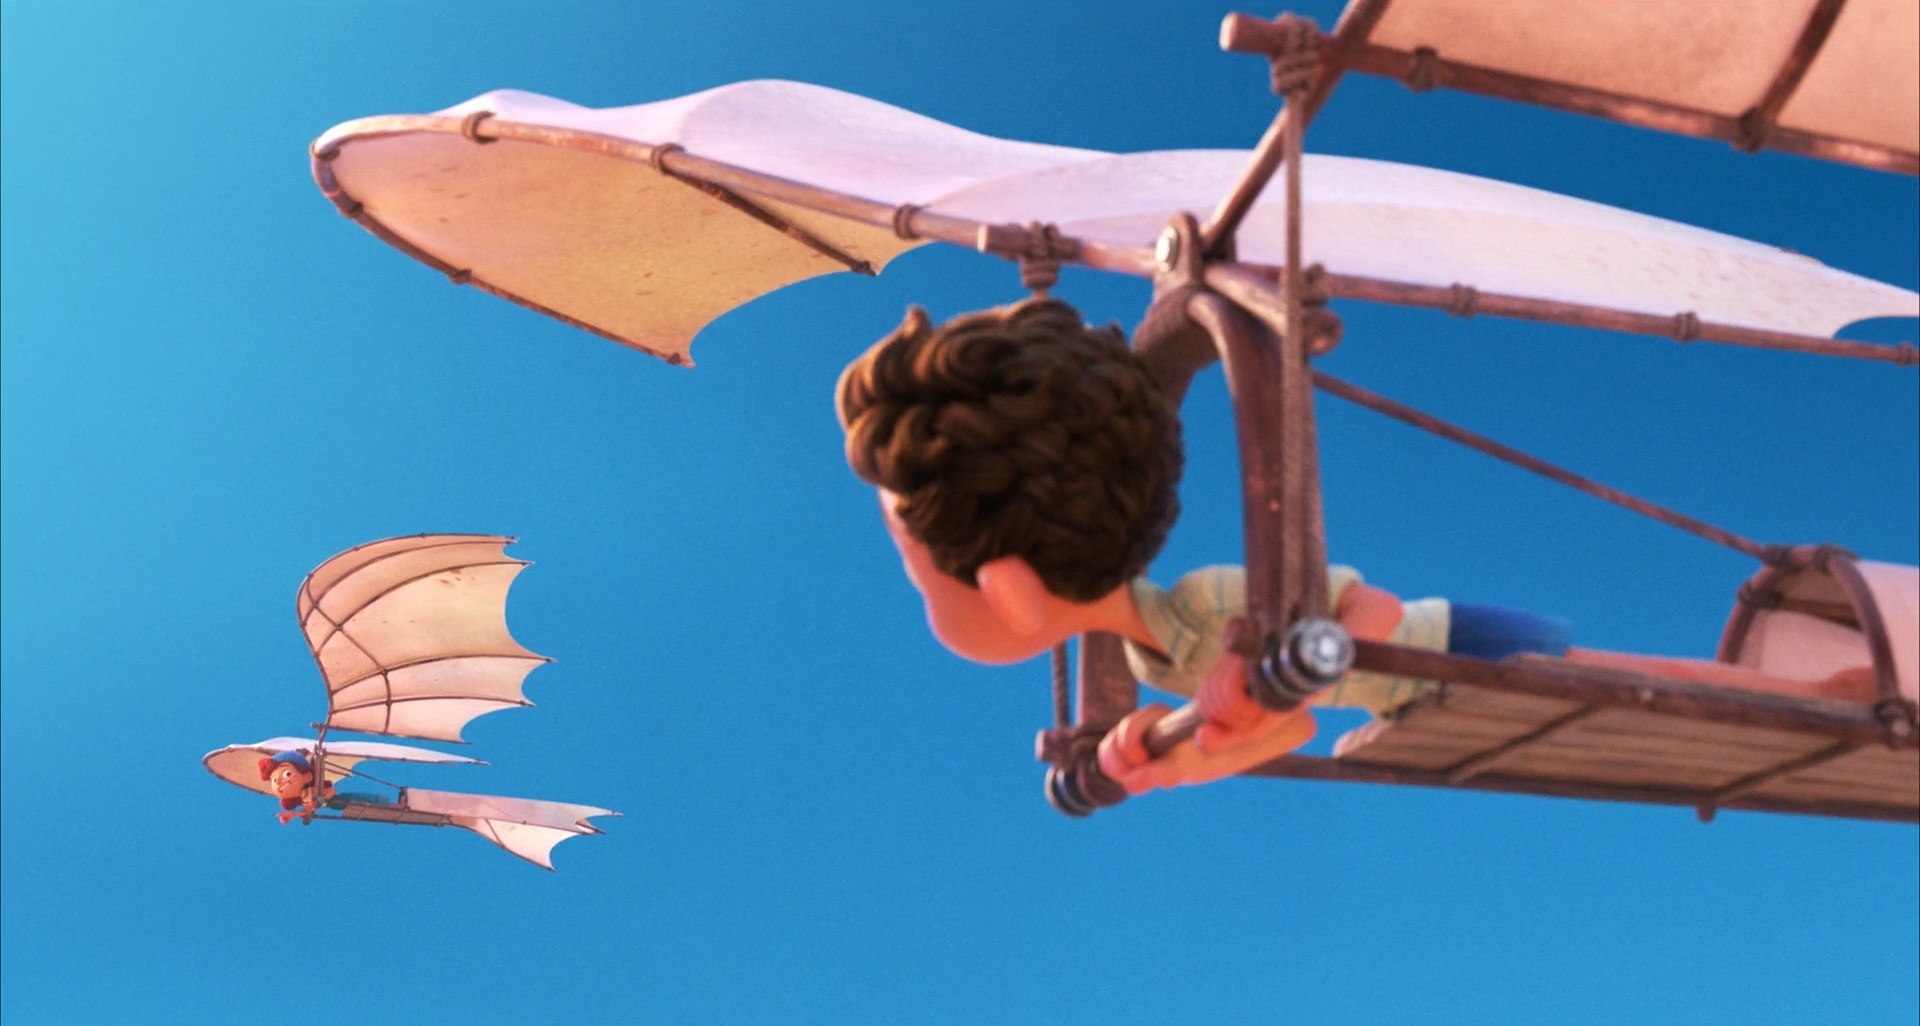 A girl and a boy flying in two contraptions